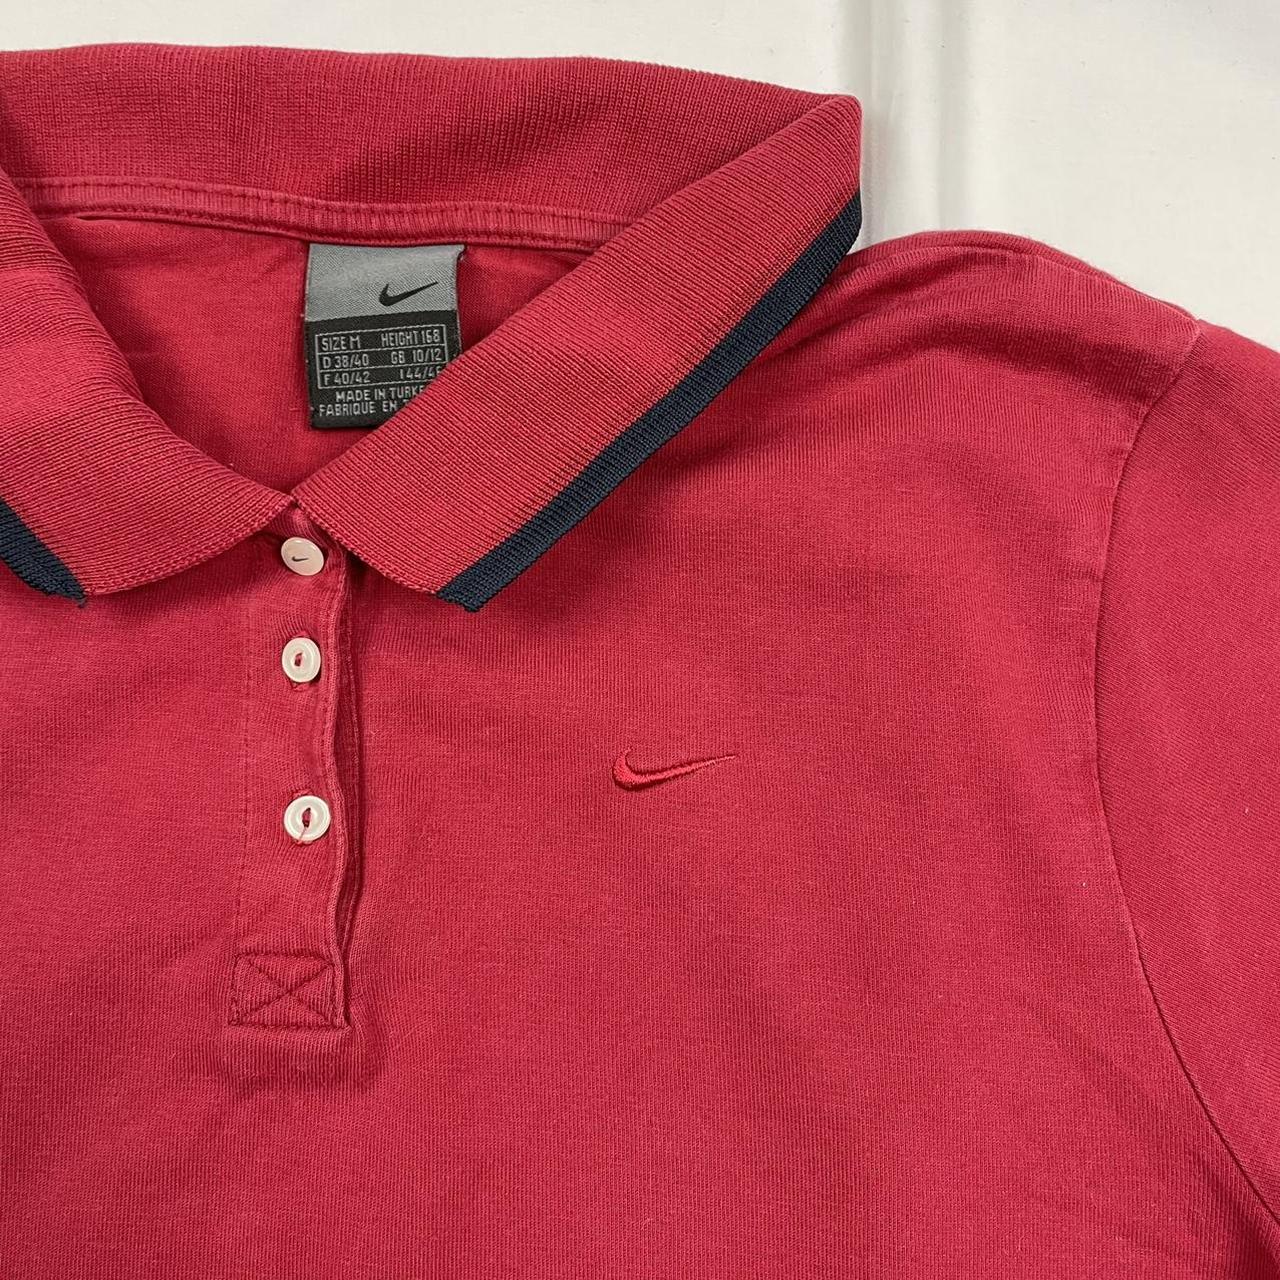 Vintage Nike Polo Shirt with an Embroidered... - Depop